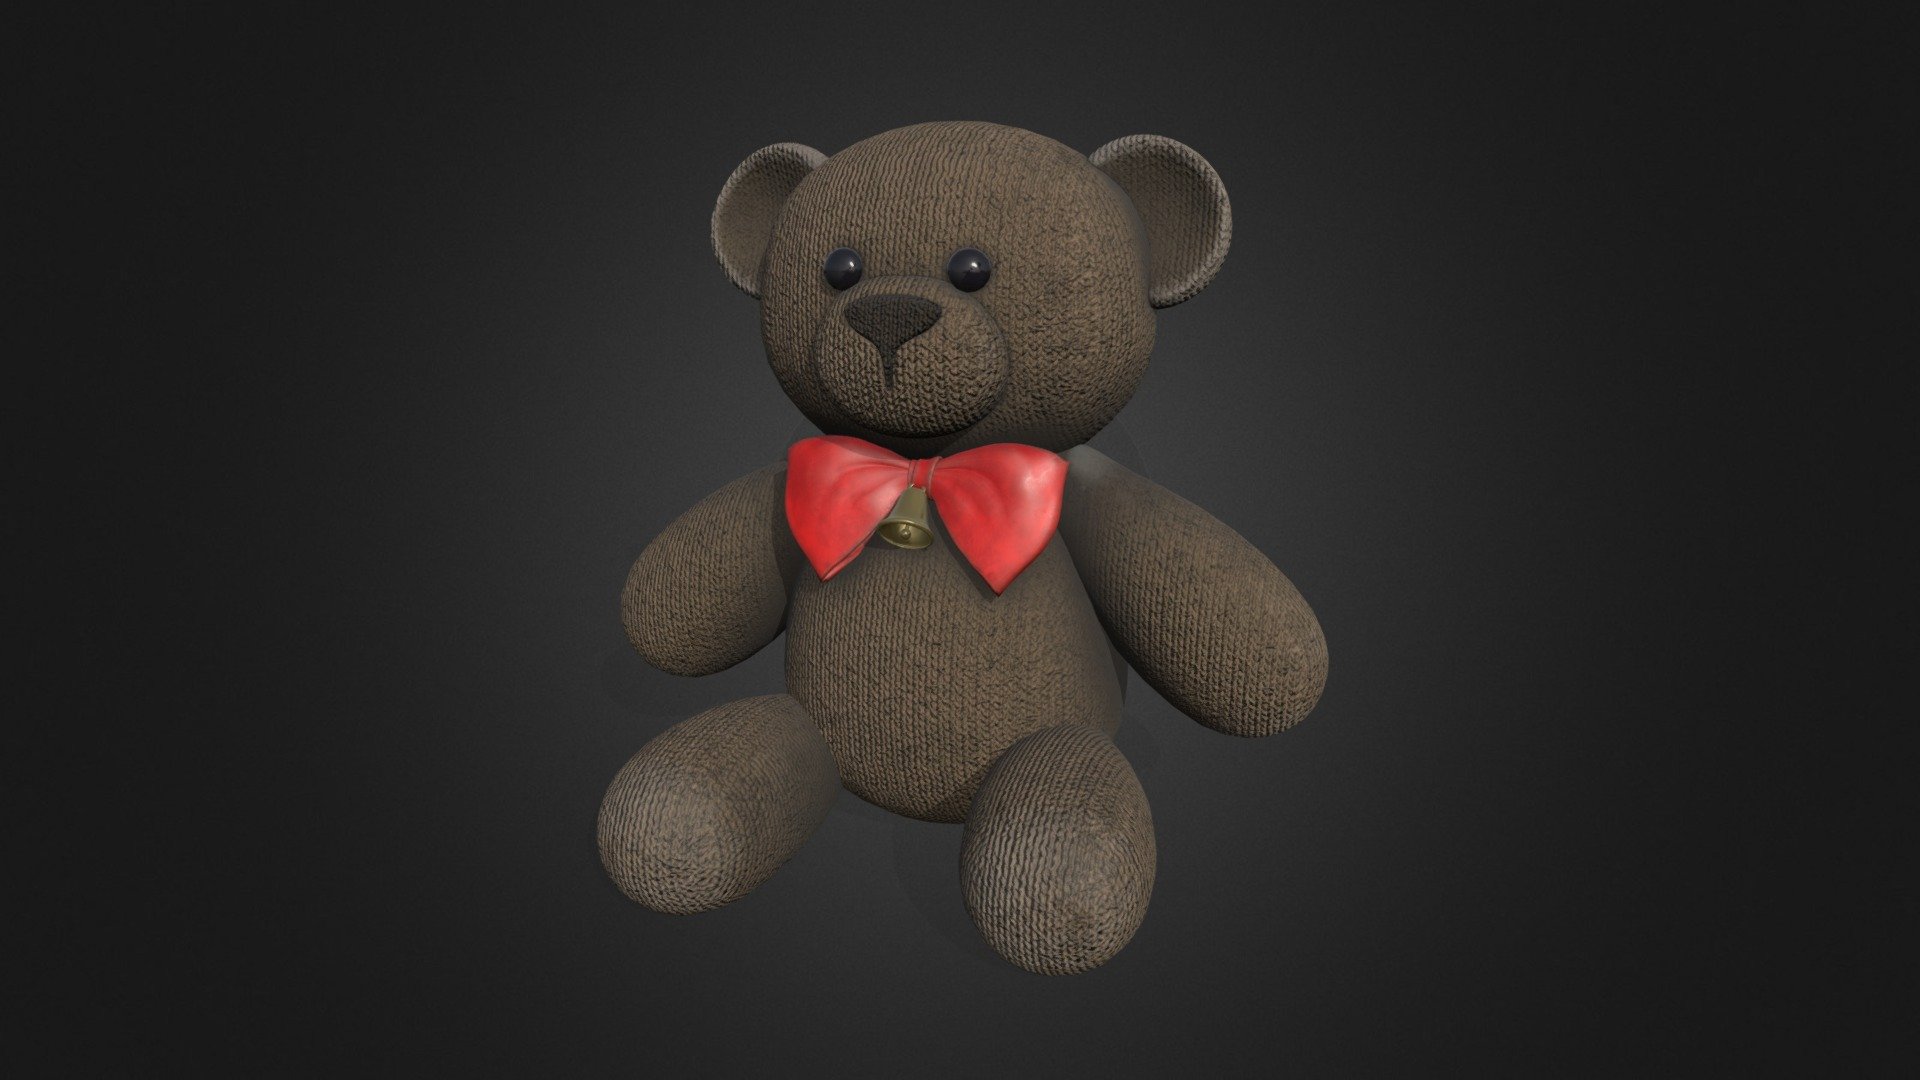 Teddy Bear made on Maya 2022 and textured on Substance Painter

Check my Portfolio:

https://www.artstation.com/tomaspb - Teddy Bear - 3D model by Tomaster (@tomaaster) 3d model